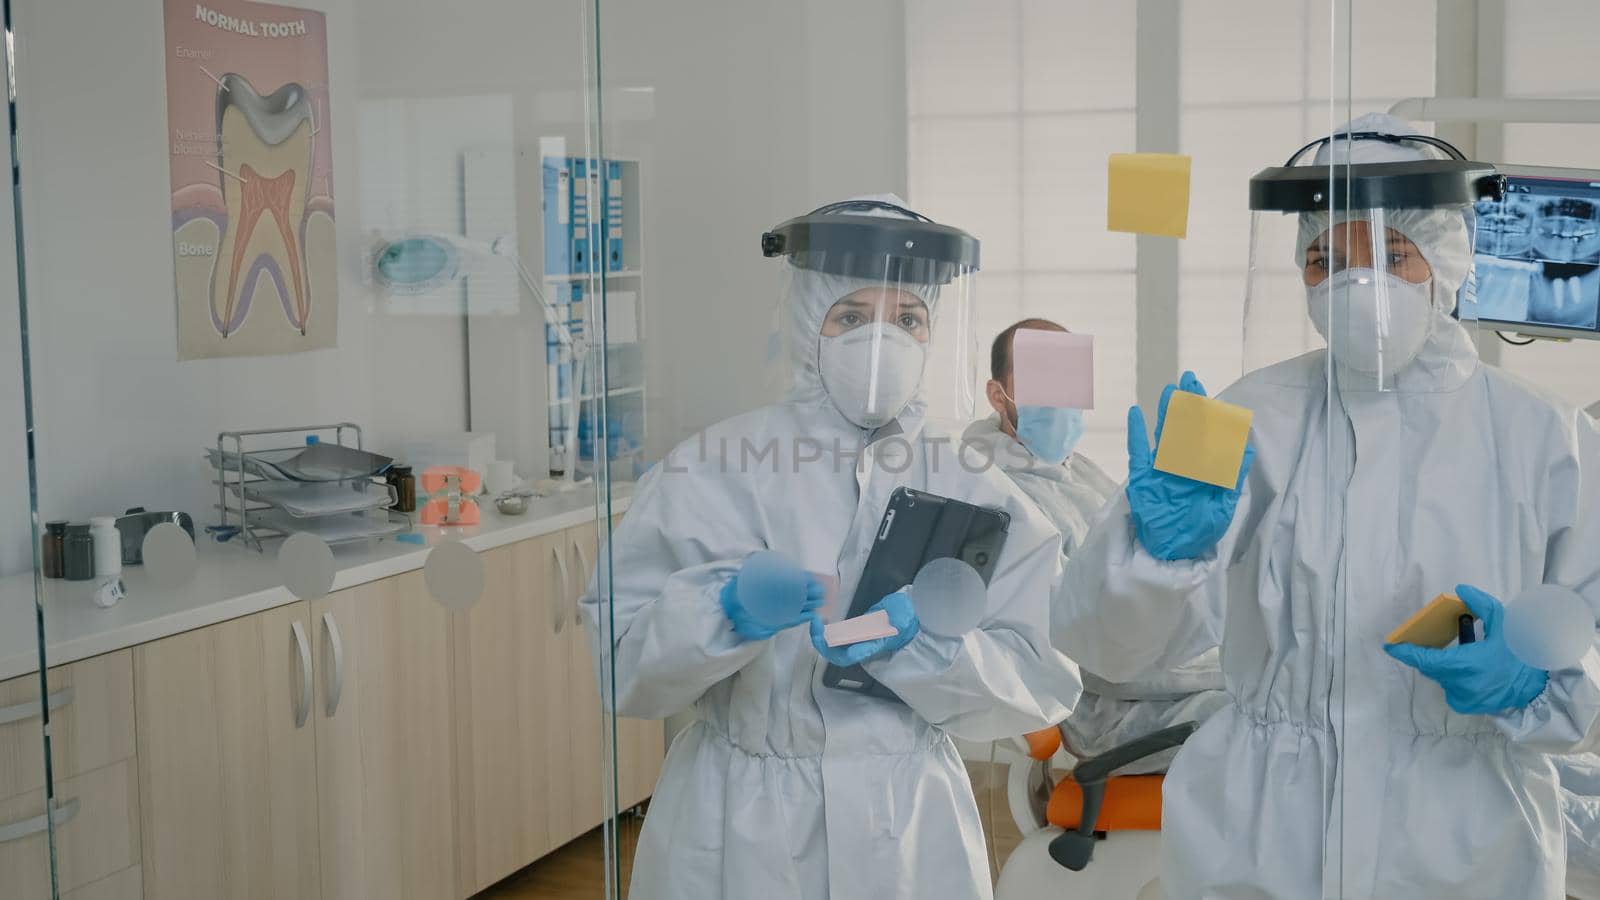 Dentistry team of specialists using sticky notes on glass in stomatology cabinet to explain teethcare diagnosis to patient. Dentist and nurse wearing ppe suits for examination during pandemic